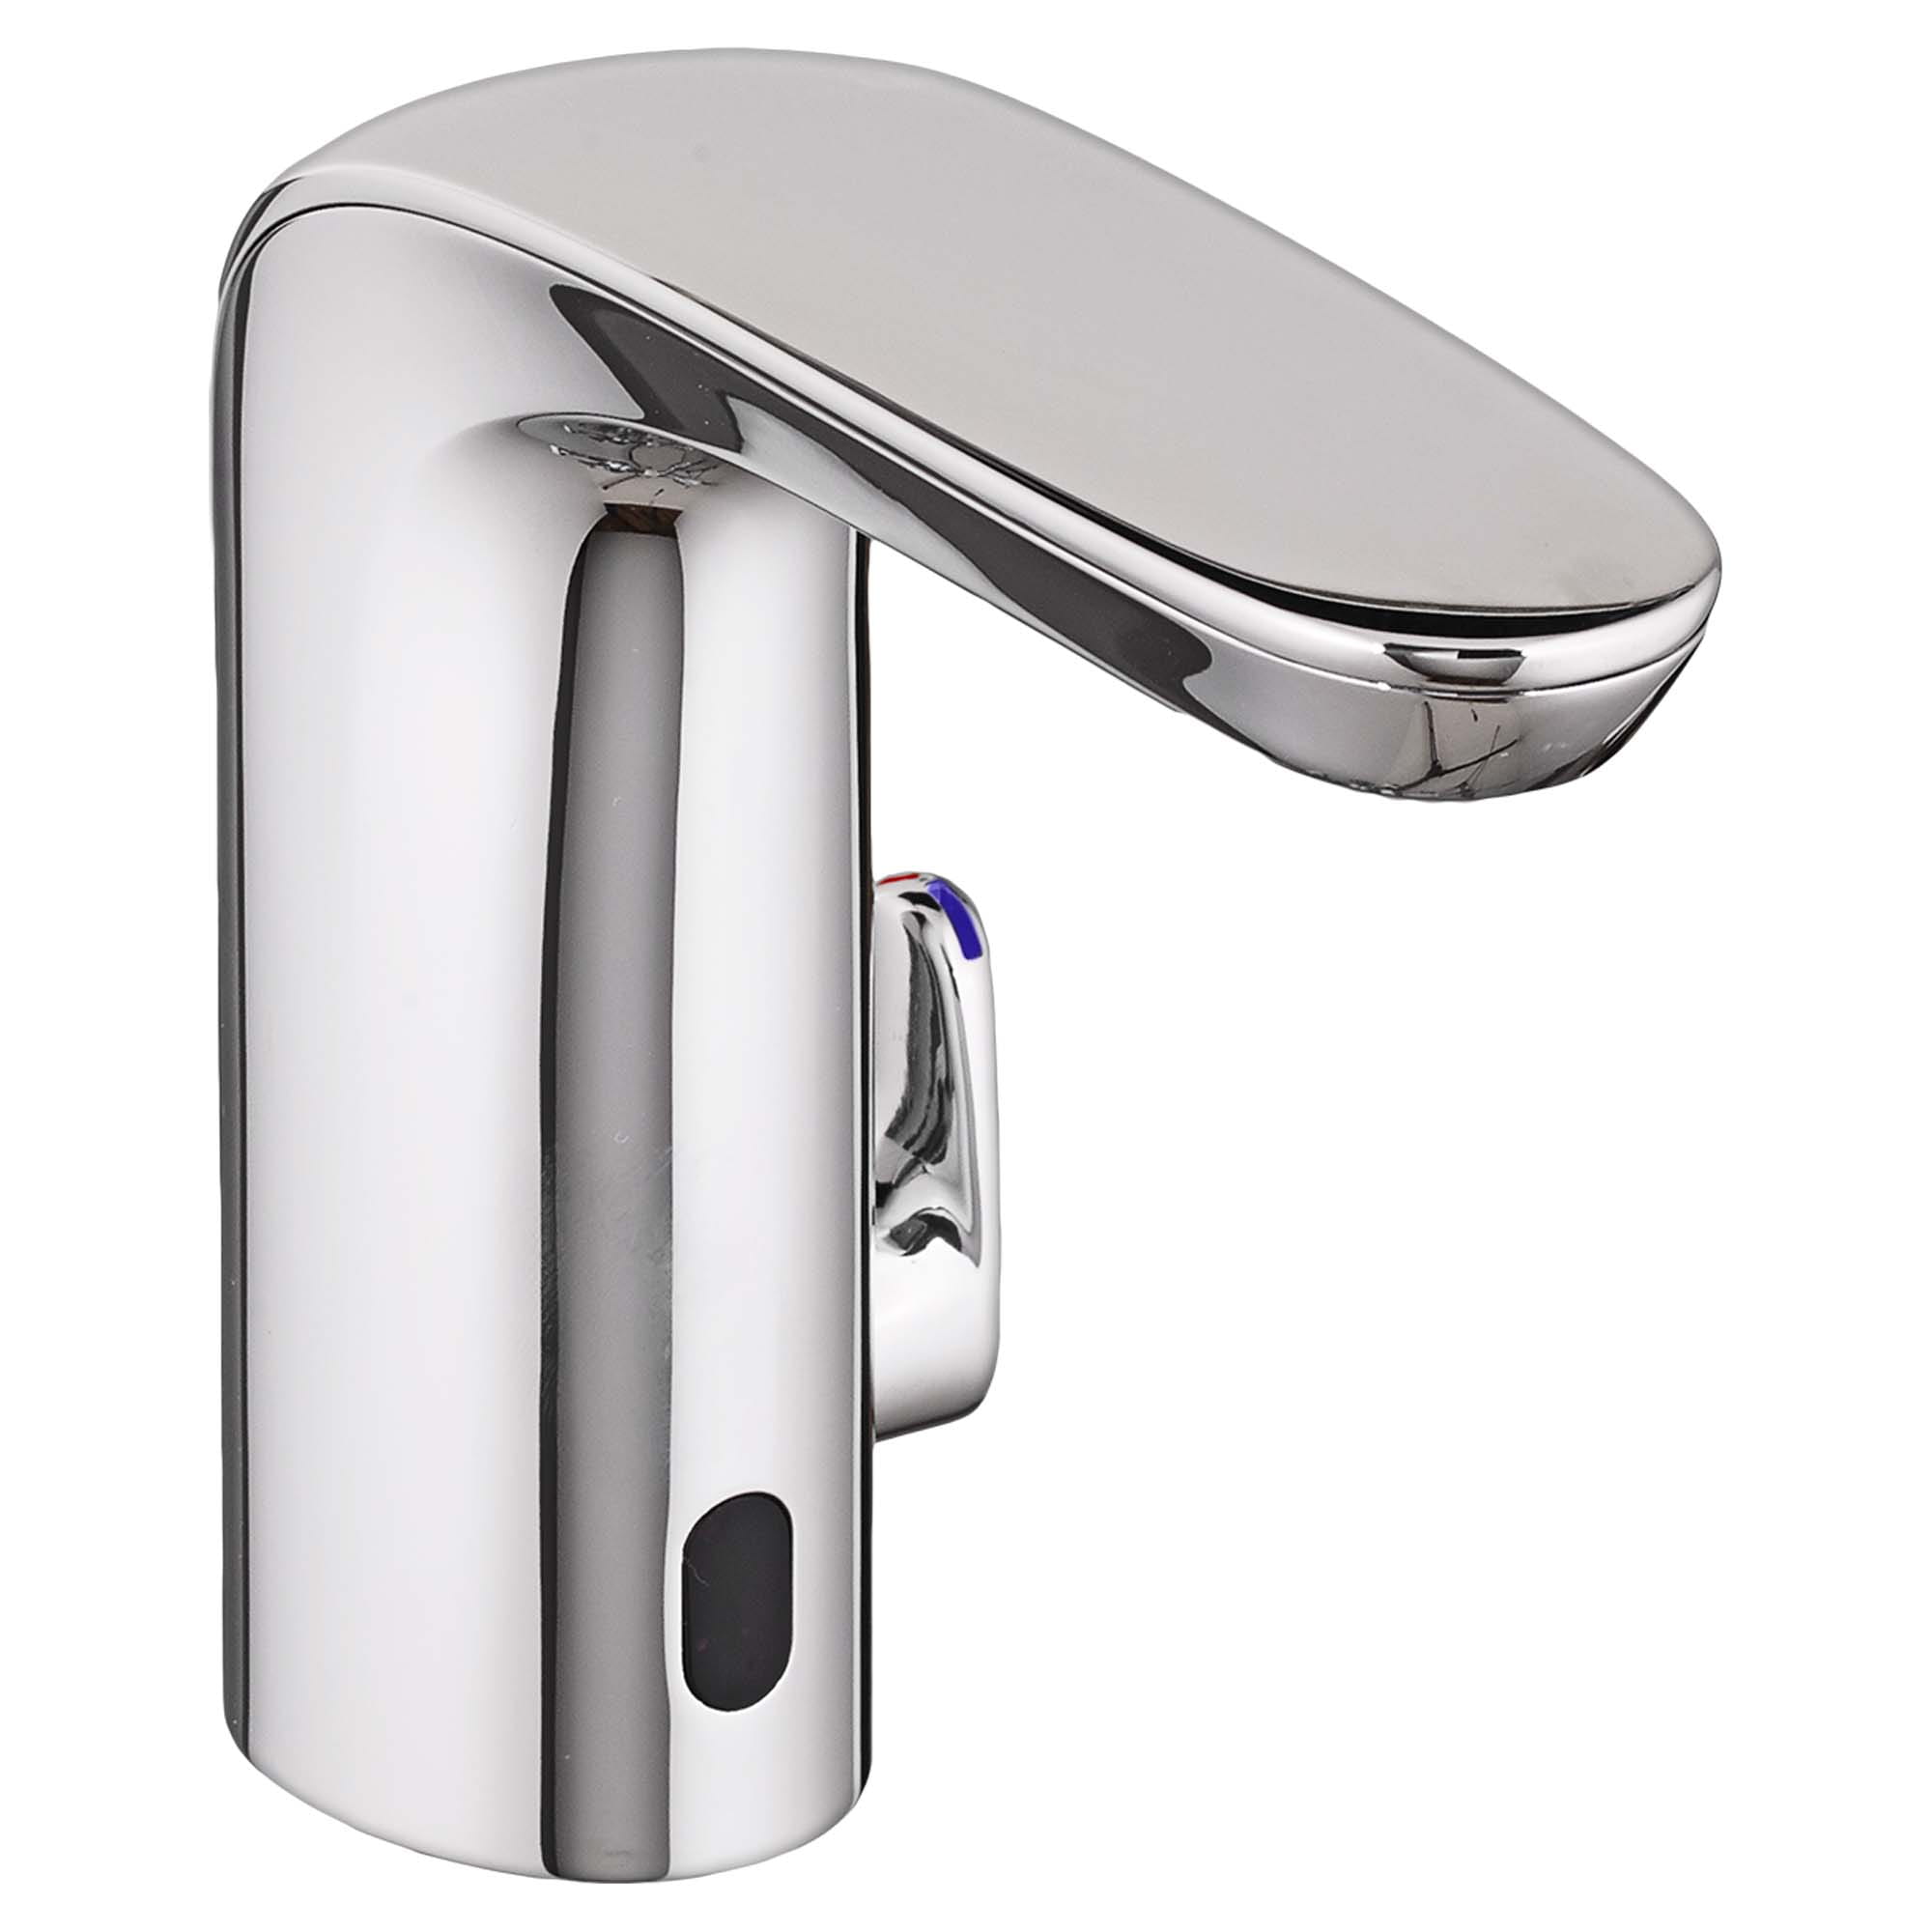 NextGen™ Selectronic® Touchless Faucet, Base Model With Above-Deck Mixing, 0.35 gpm/1.3 Lpm